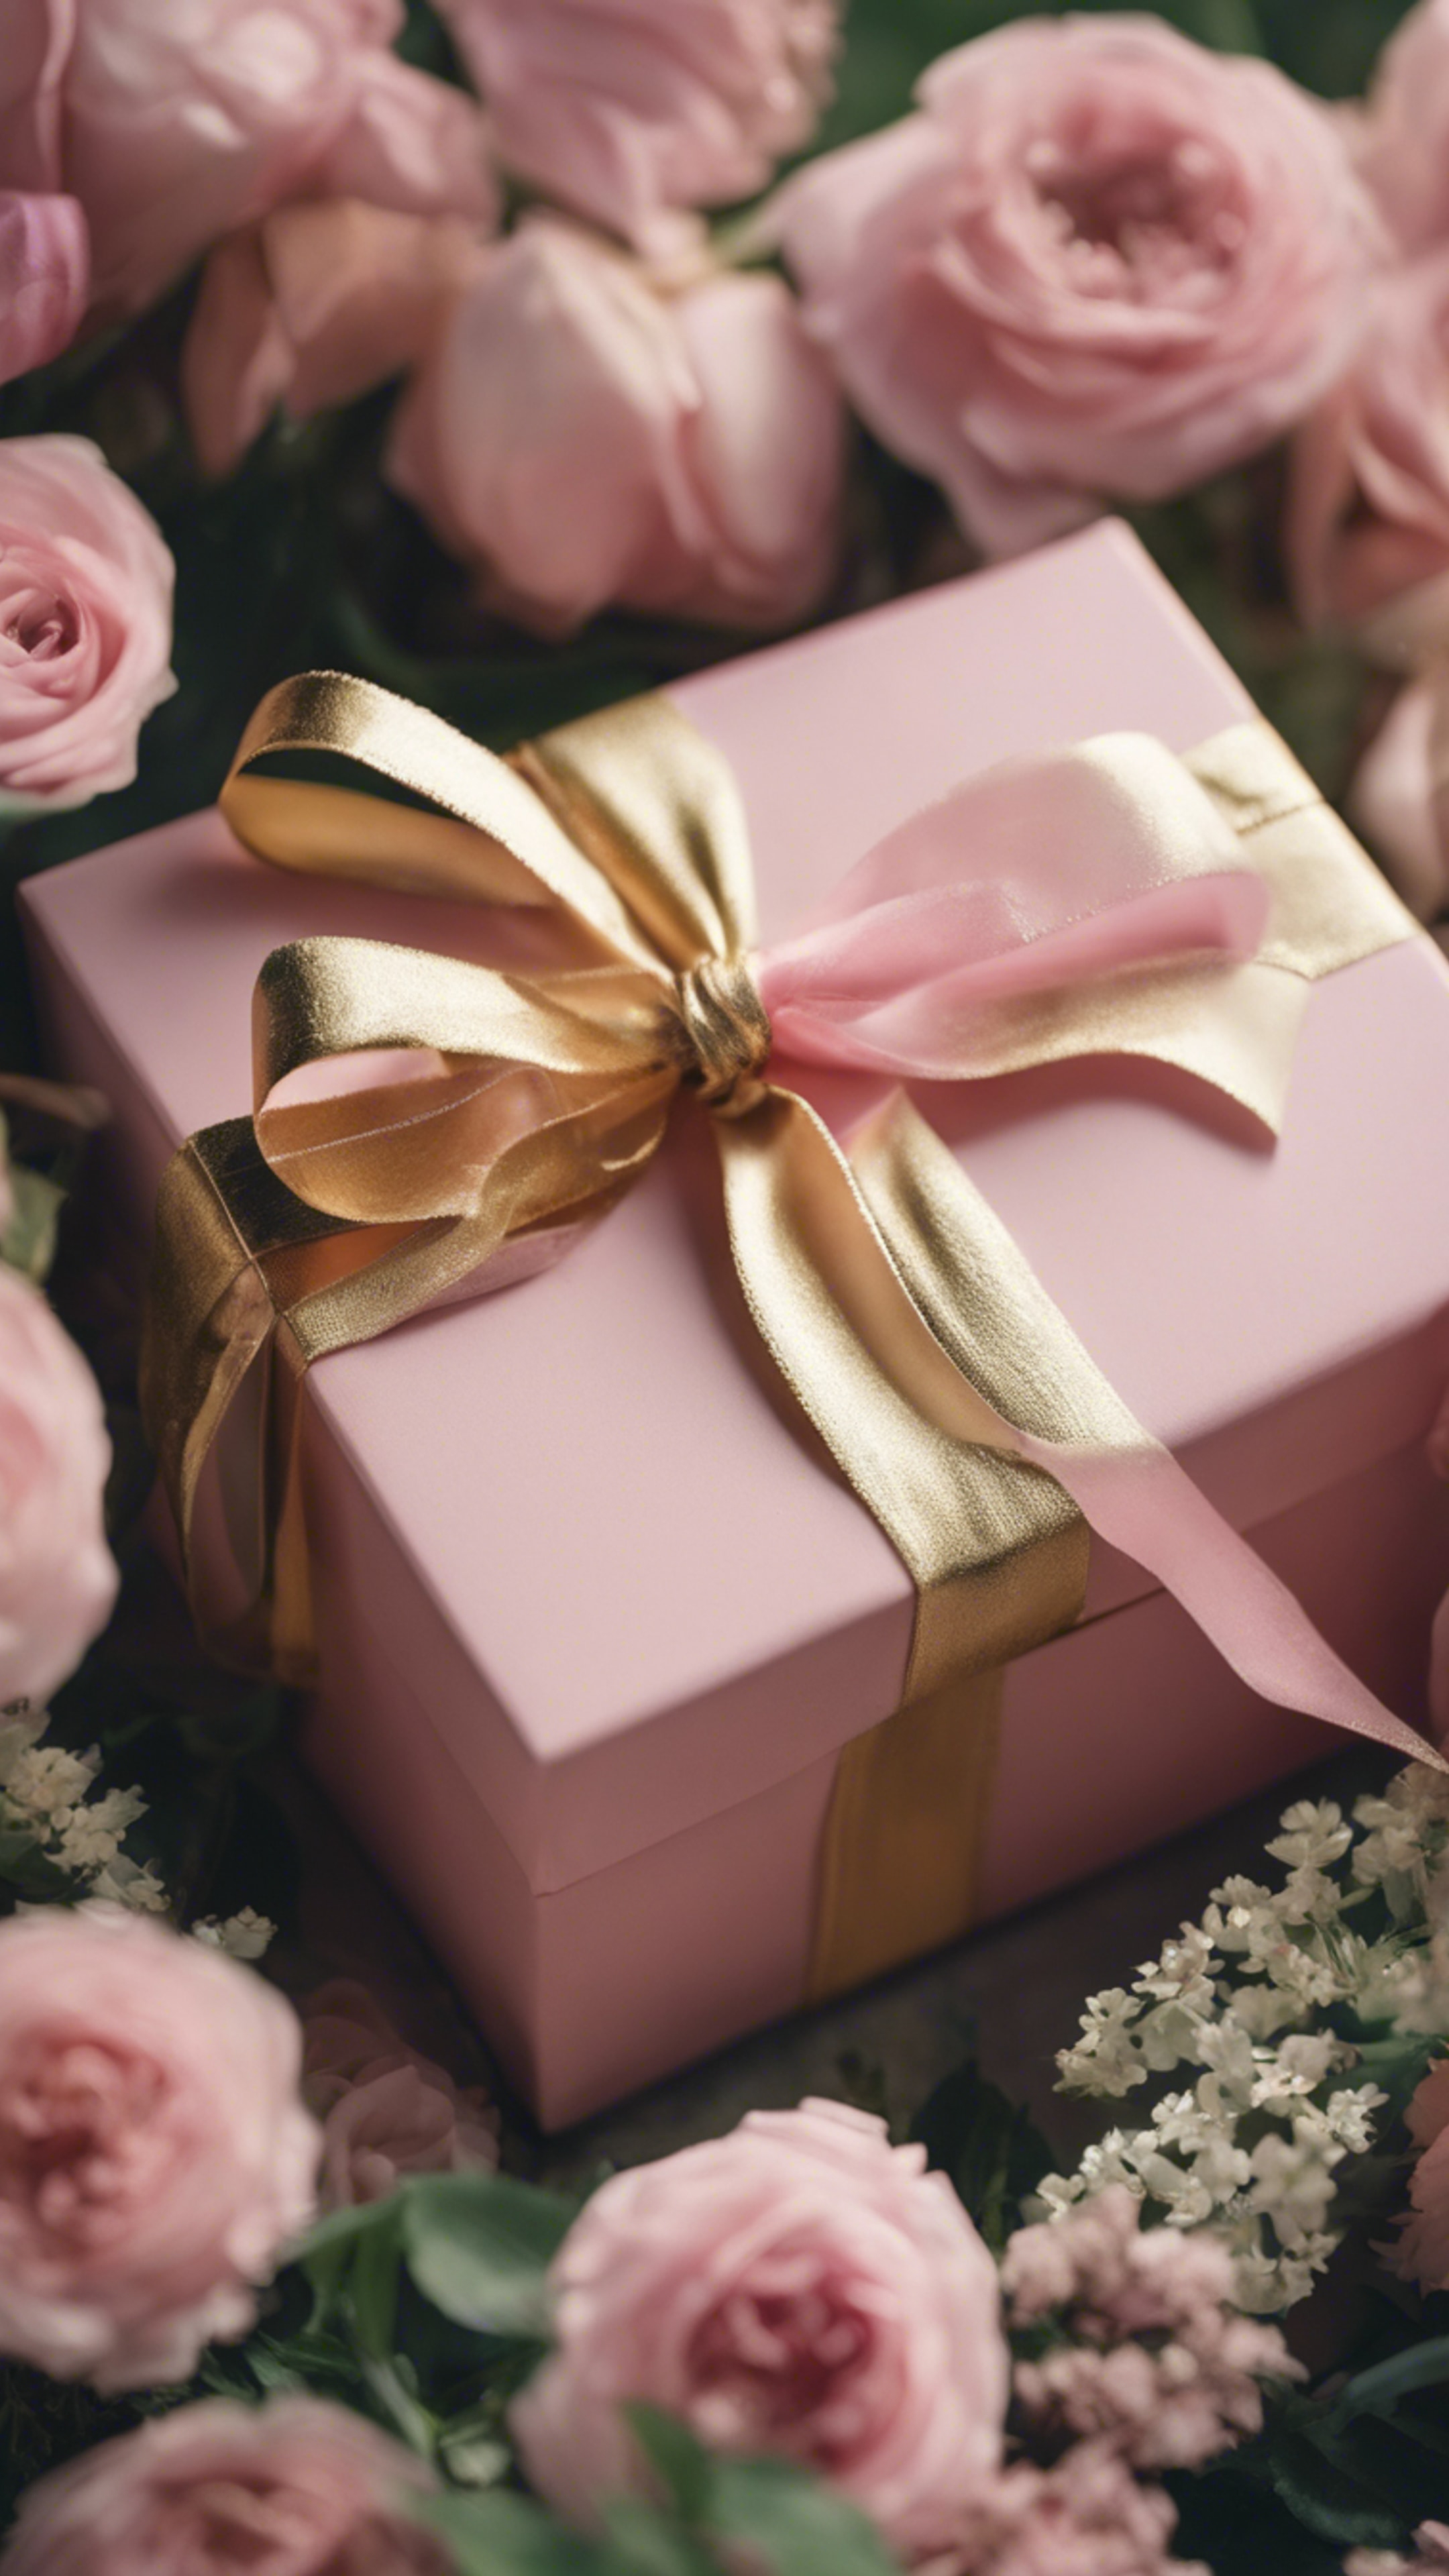 A gold-ribboned pink gift box nestled amongst flowers and greenery.壁紙[057f26c1d4b14d2a96a8]